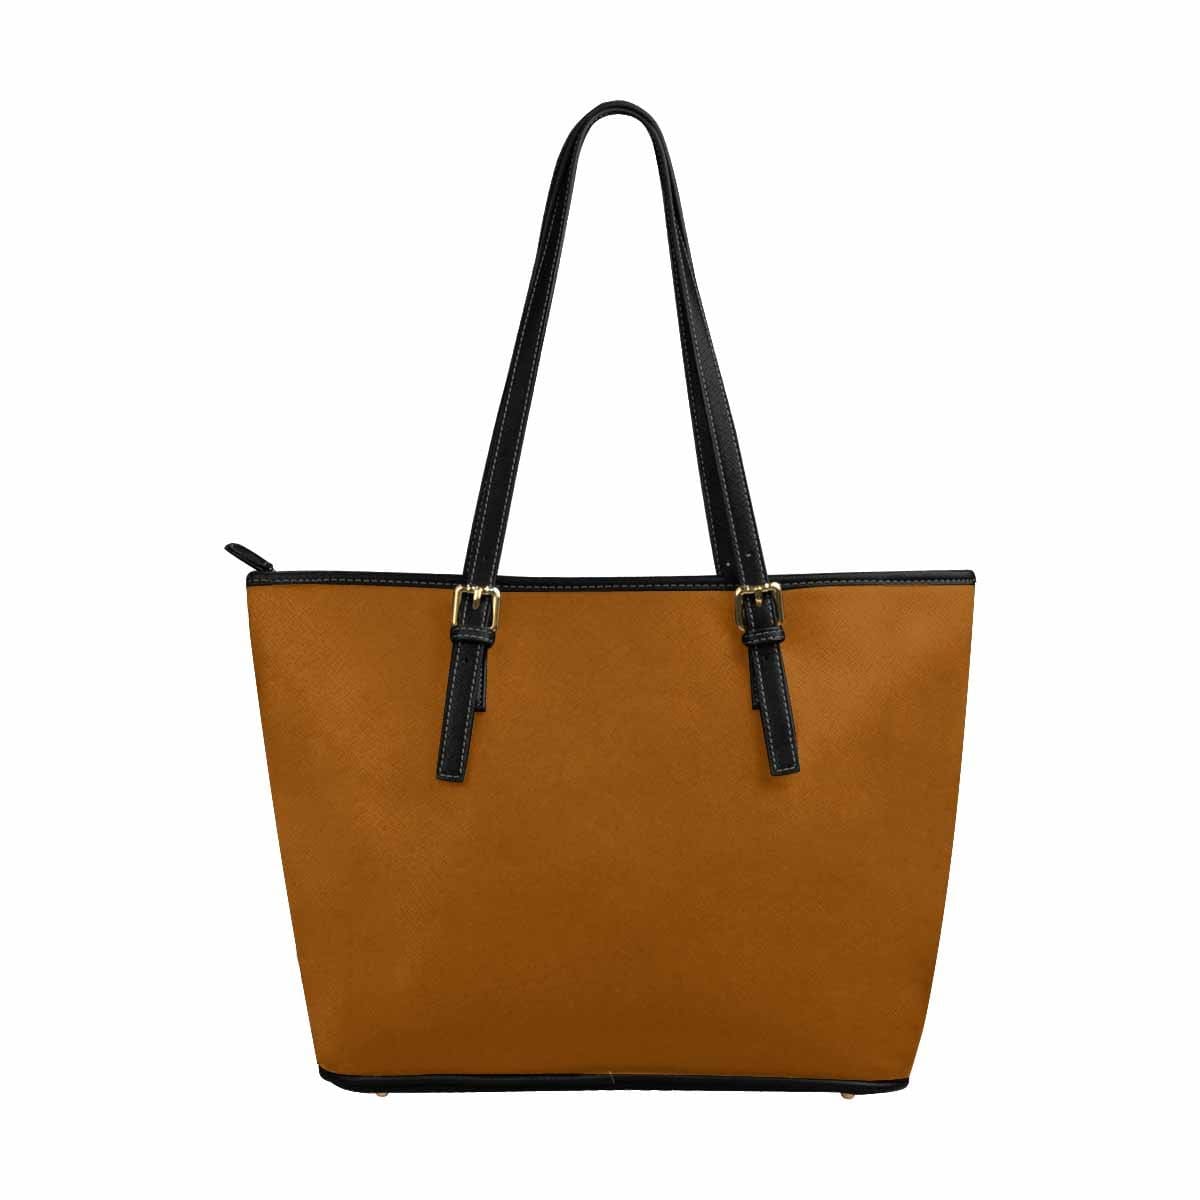 Large Leather Tote Shoulder Bag - Brown - Bags | Leather Tote Bags